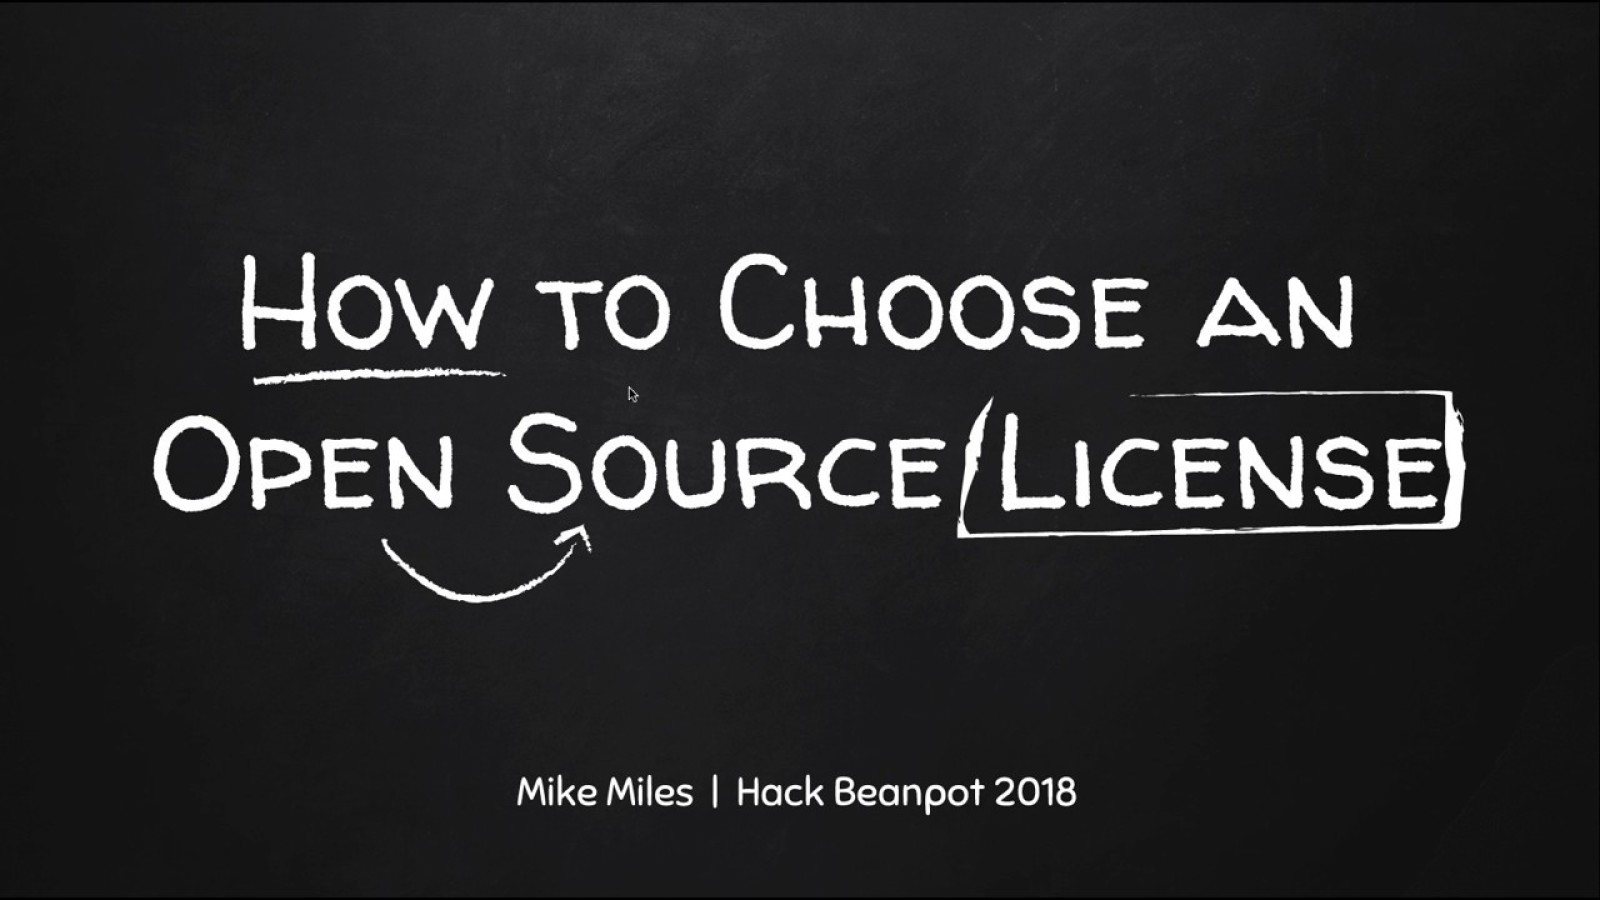 How to choose an open source license